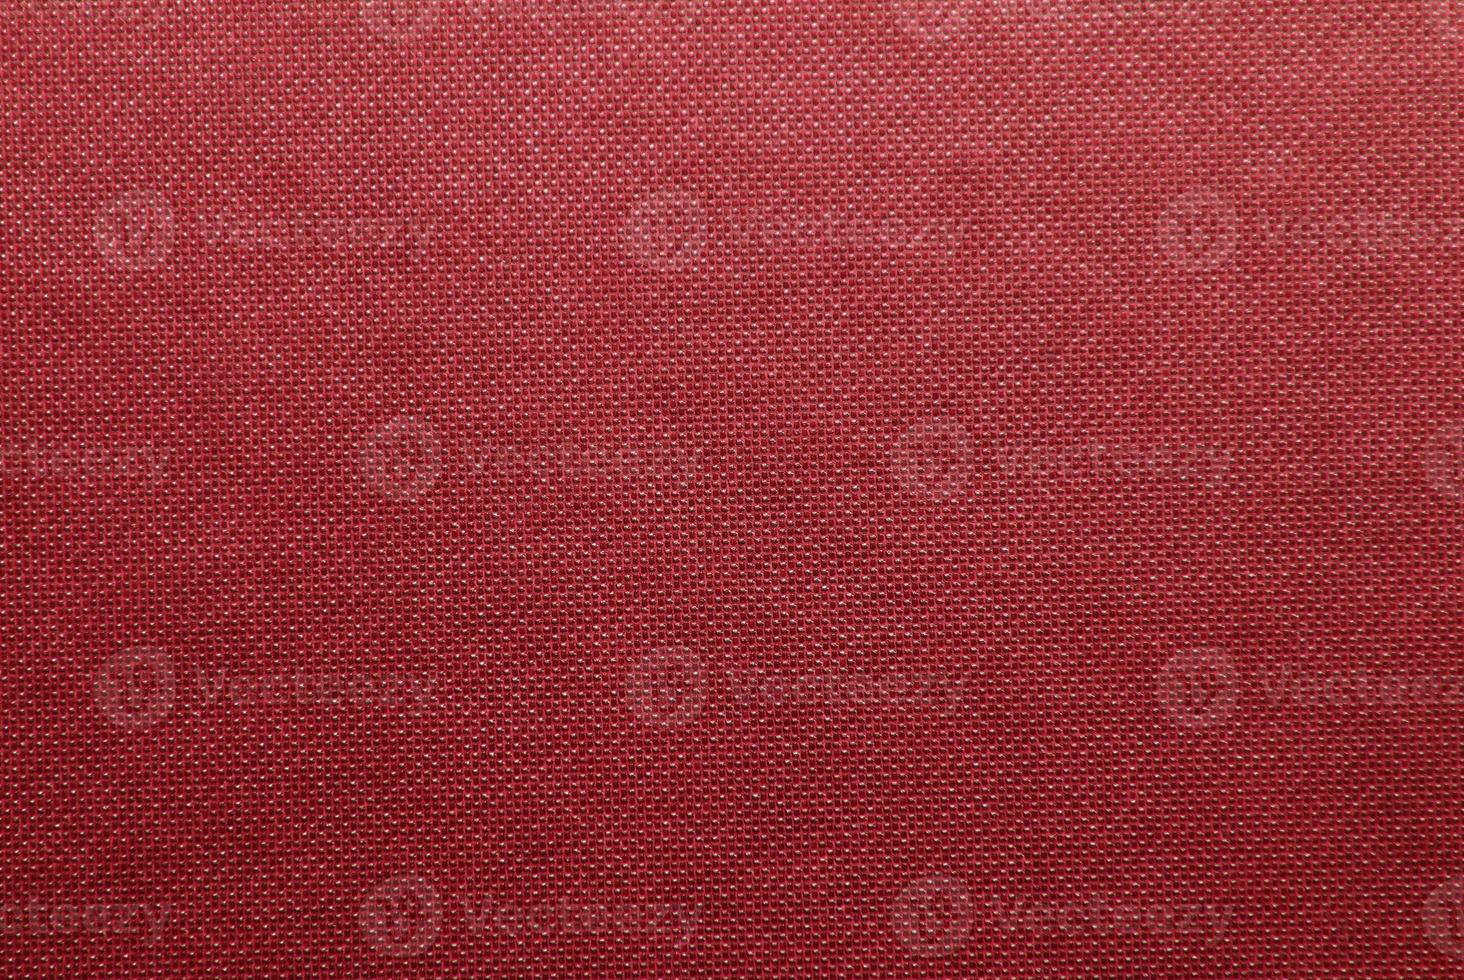 Canvas background with repetitive pattern photo